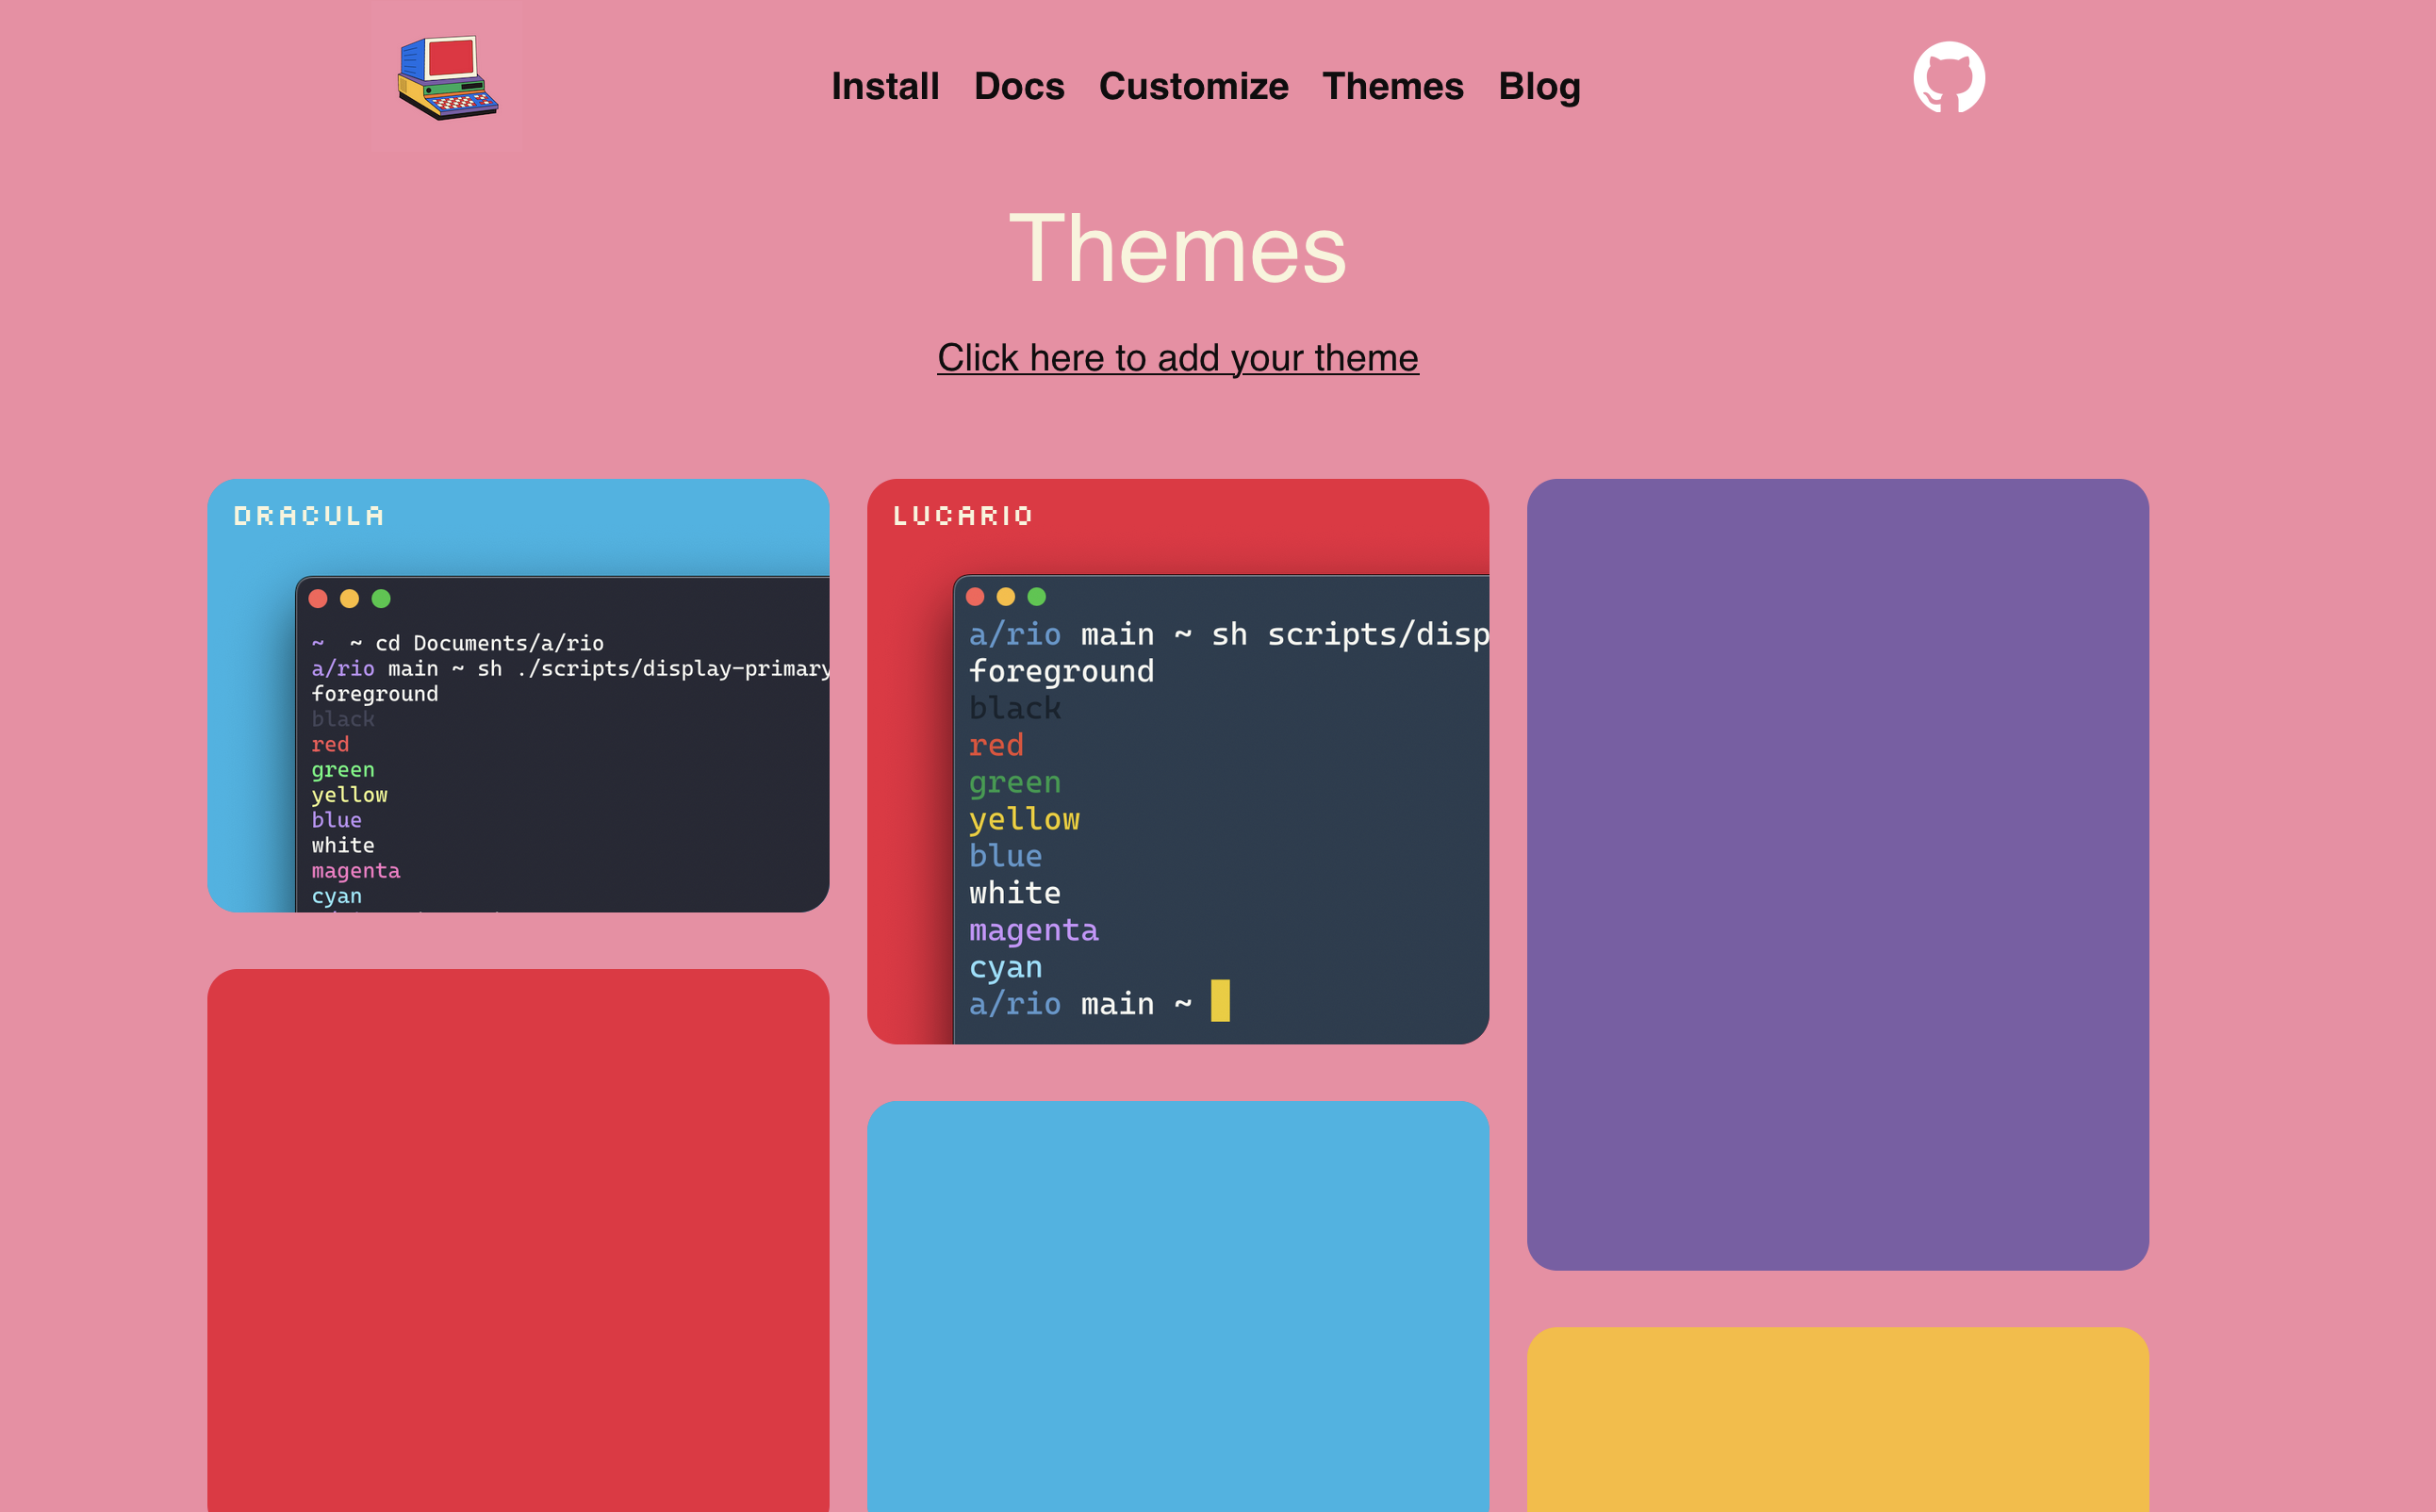 Themes support